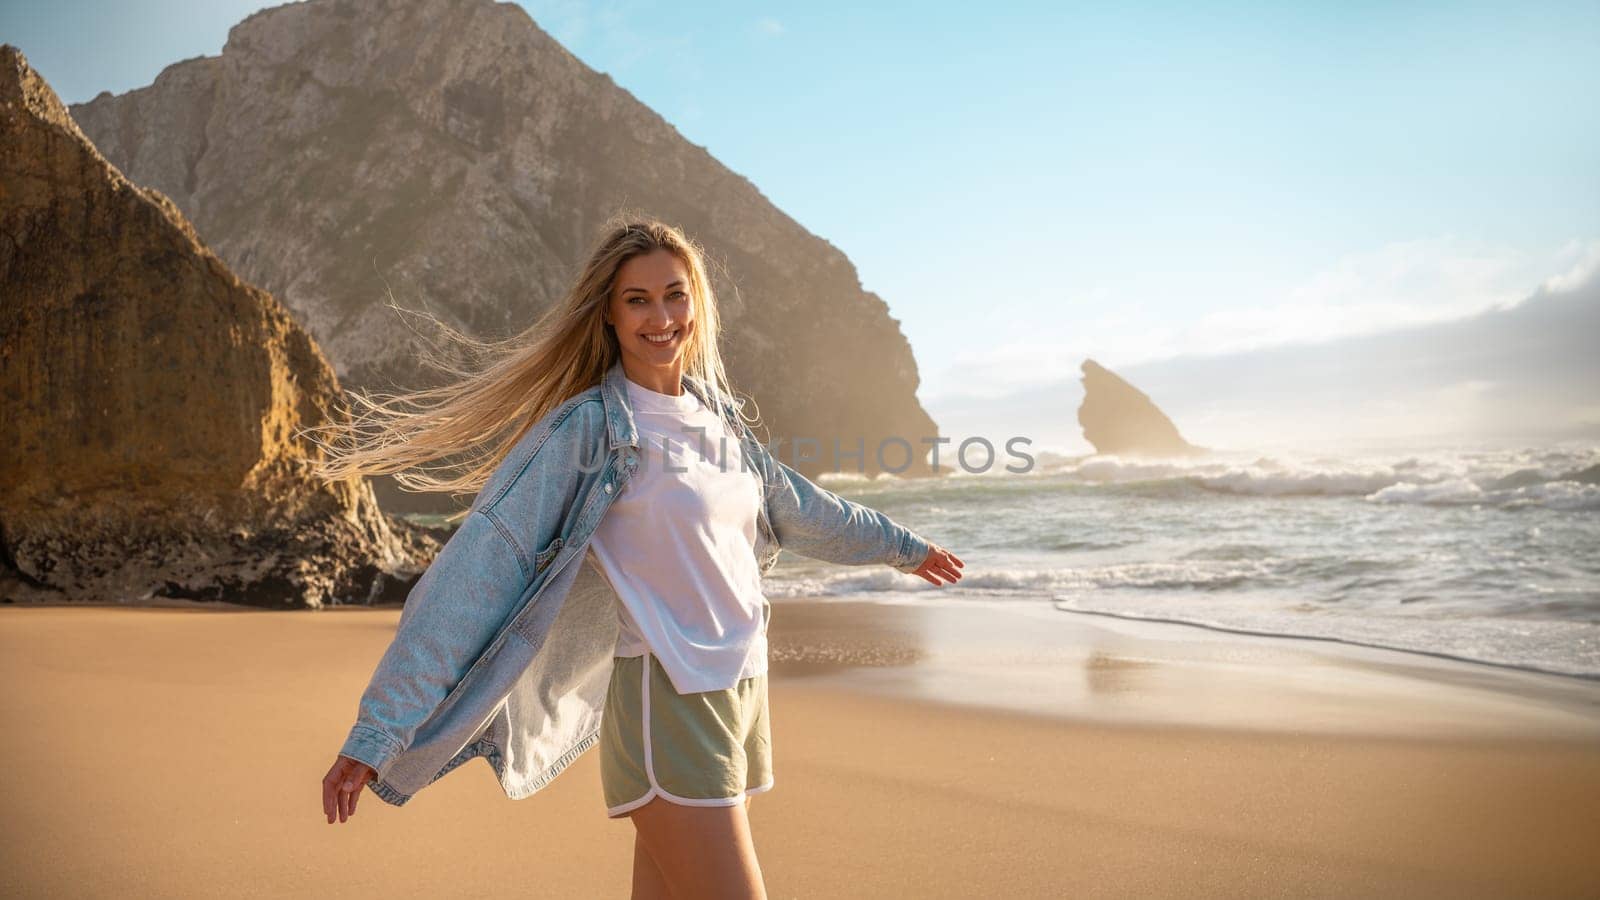 Woman enjoying being on beach with big rocks behind. Female with long blond hair is happy and smile while dancing on sand near ocean. Girl in short and denim jacket smiles to the camera on sea coast